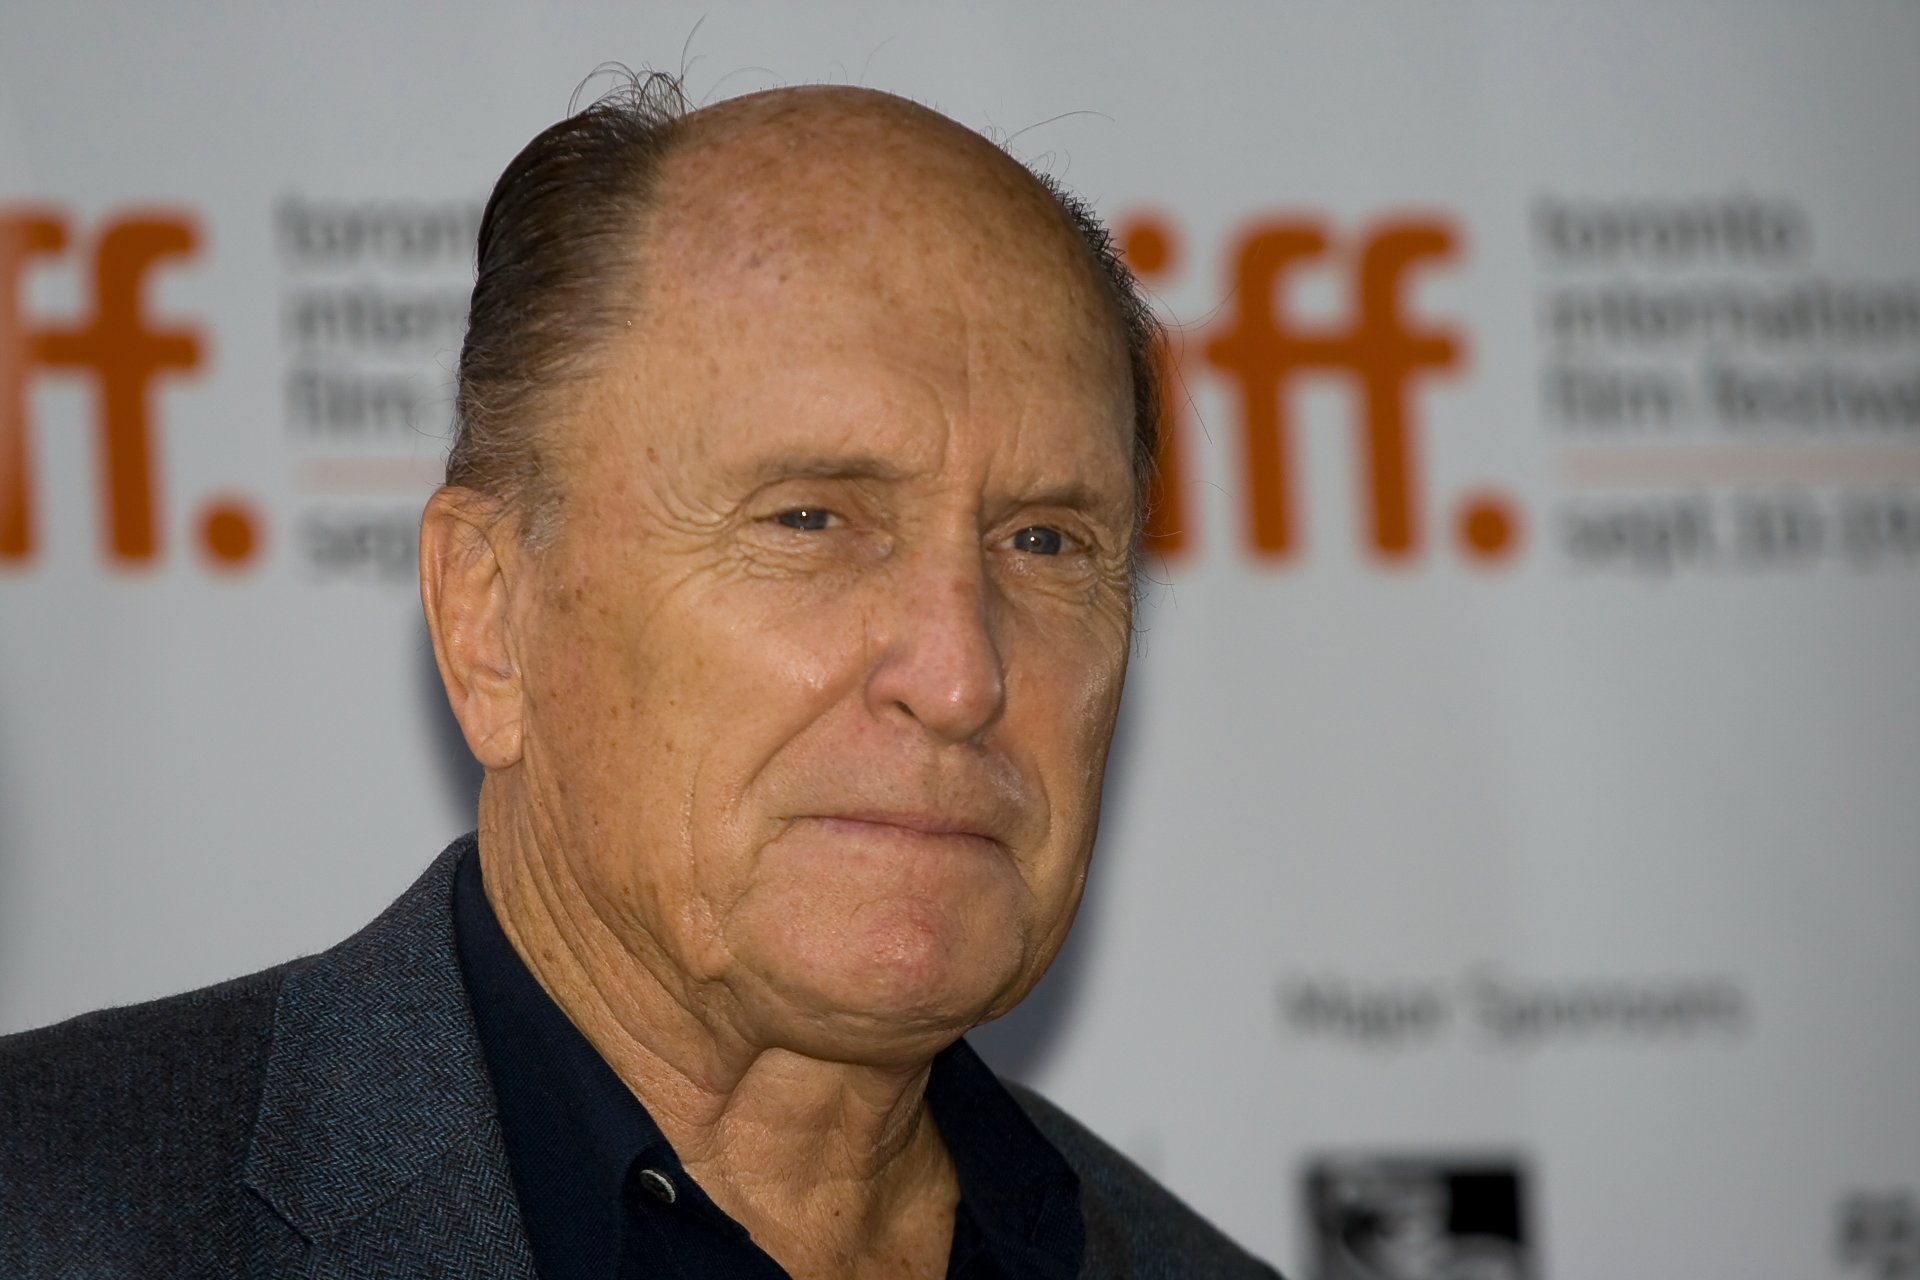 Robert Duvall at the premiere of "The Road", directed by John Hillcoat, during the Toronto International Film Festival, on September 13, 2009 | Photo: WIkiMedia